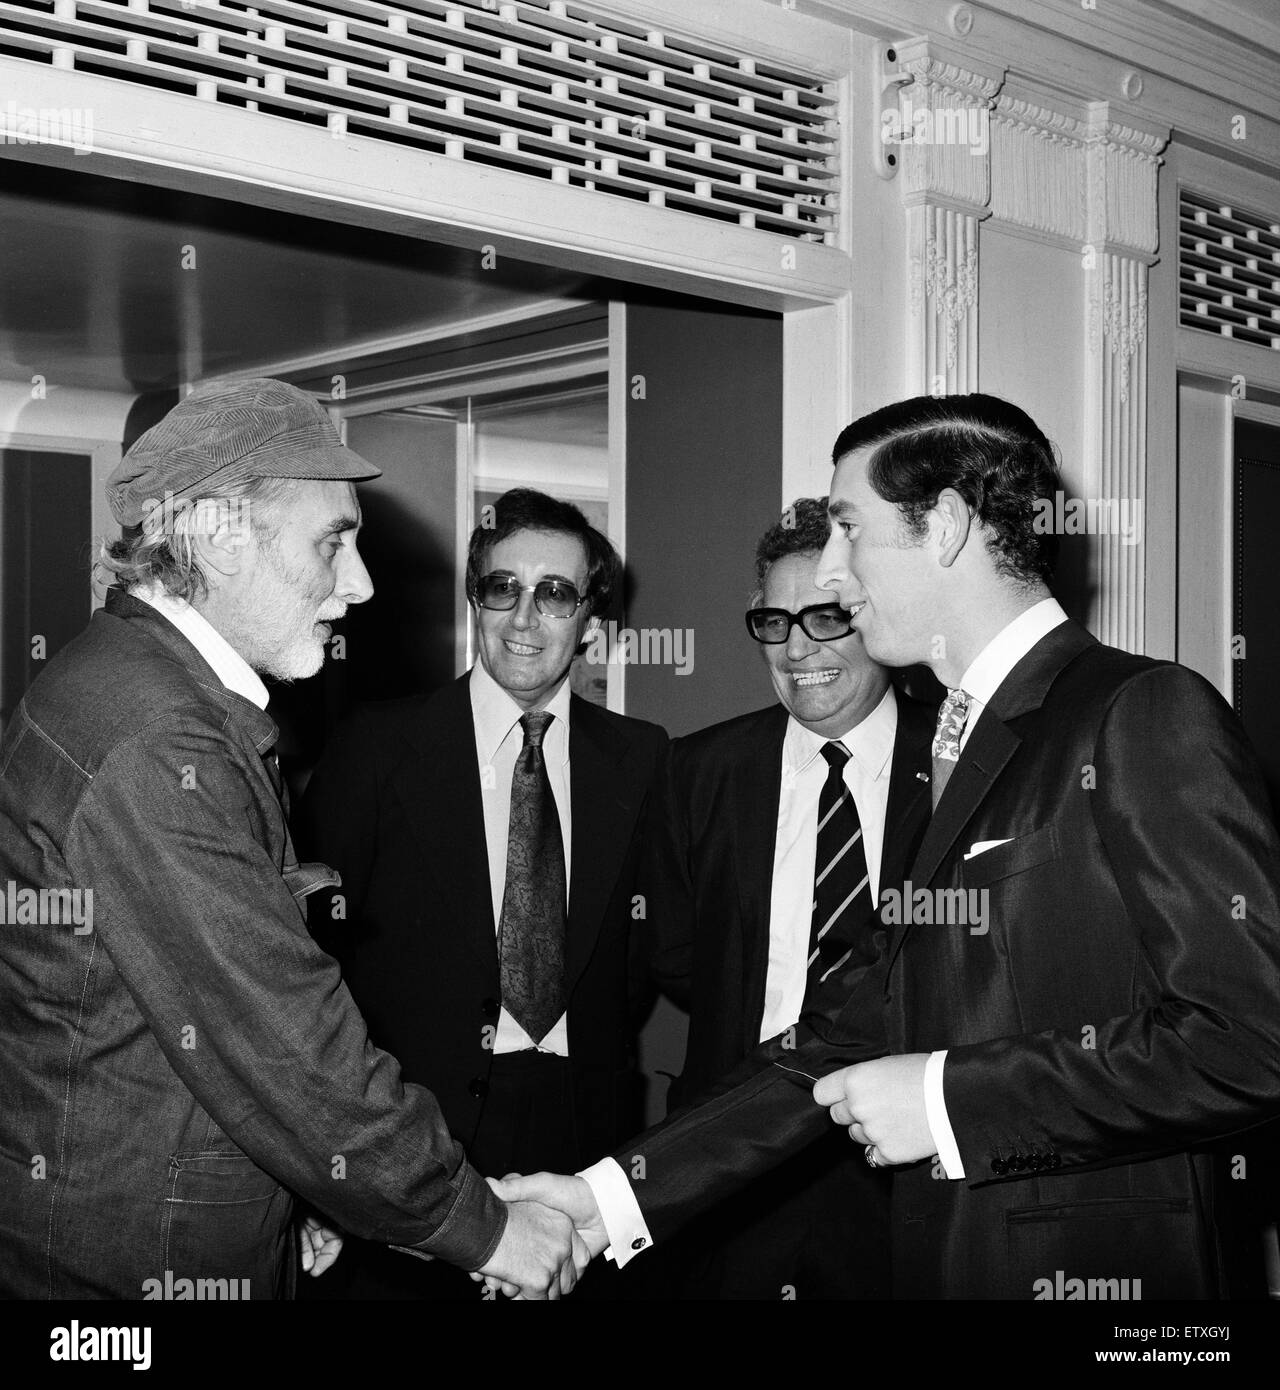 Prince Charles dines with The Goons at The Dorchester, London. Left to right, Spike Milligan, Peter Sellers and Michael Bentine greet the Prince. Harry Secombe was at home ill. 11th November 1974. Stock Photo